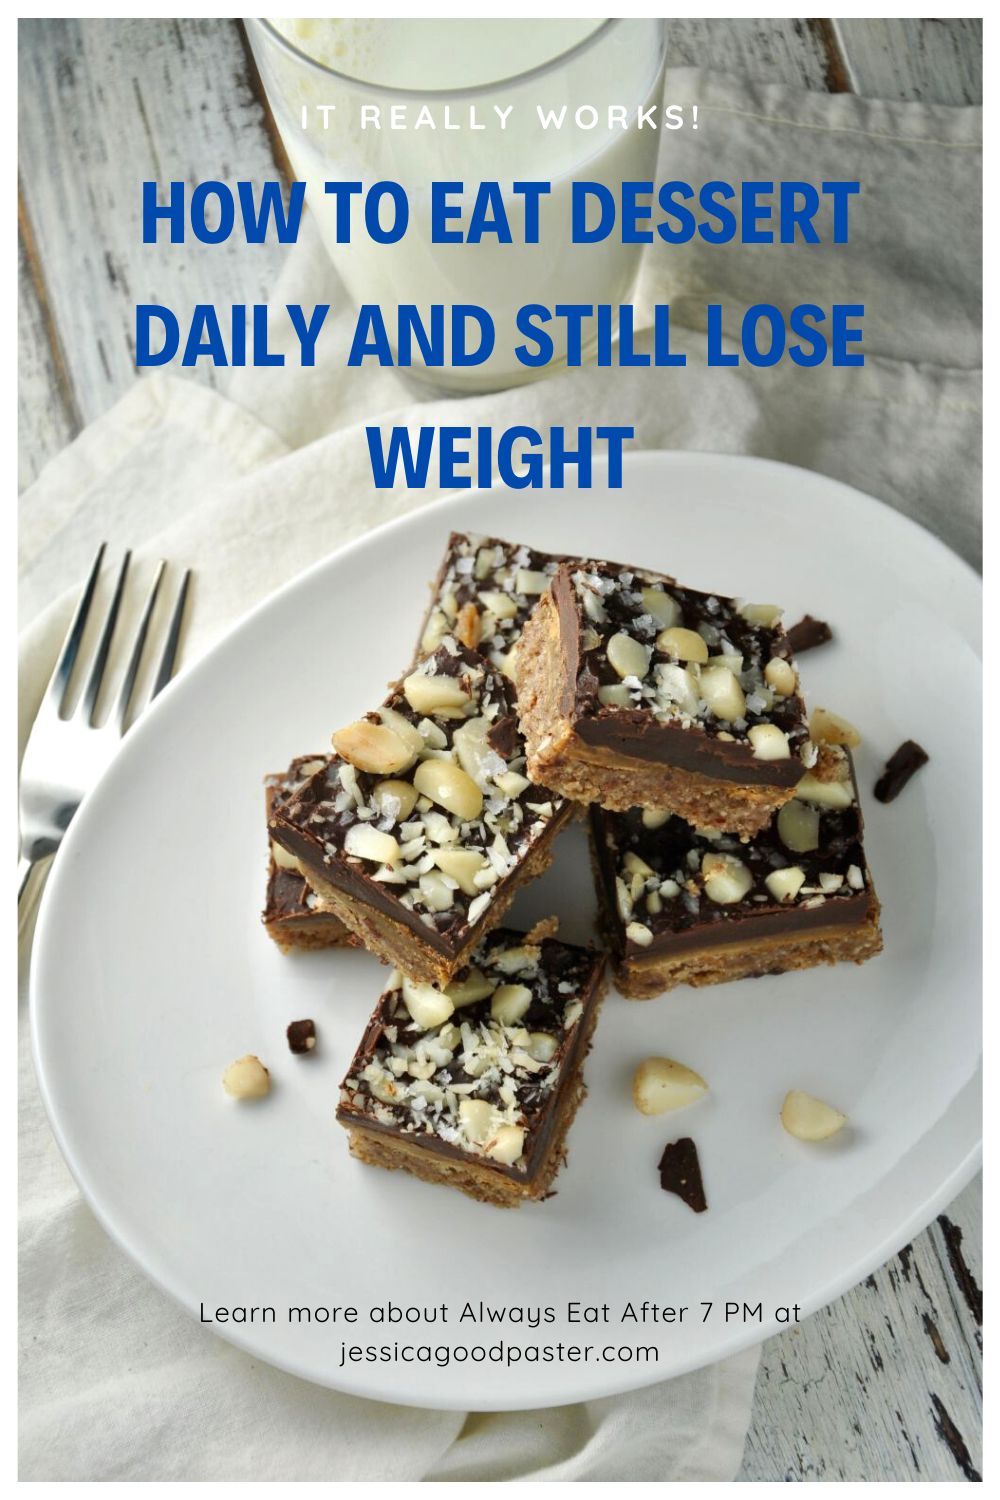 How to Eat Dessert Daily and Still Lose Weight | The new program Always Eat After 7 PM by Joel Marion lets you break traditional dieting rules by eating huge dinners, having daily dessert, and late-night snacks. Learn why this sustainable diet works for me. #AlwaysEatAfter7PM #diet #loseweight #healthy